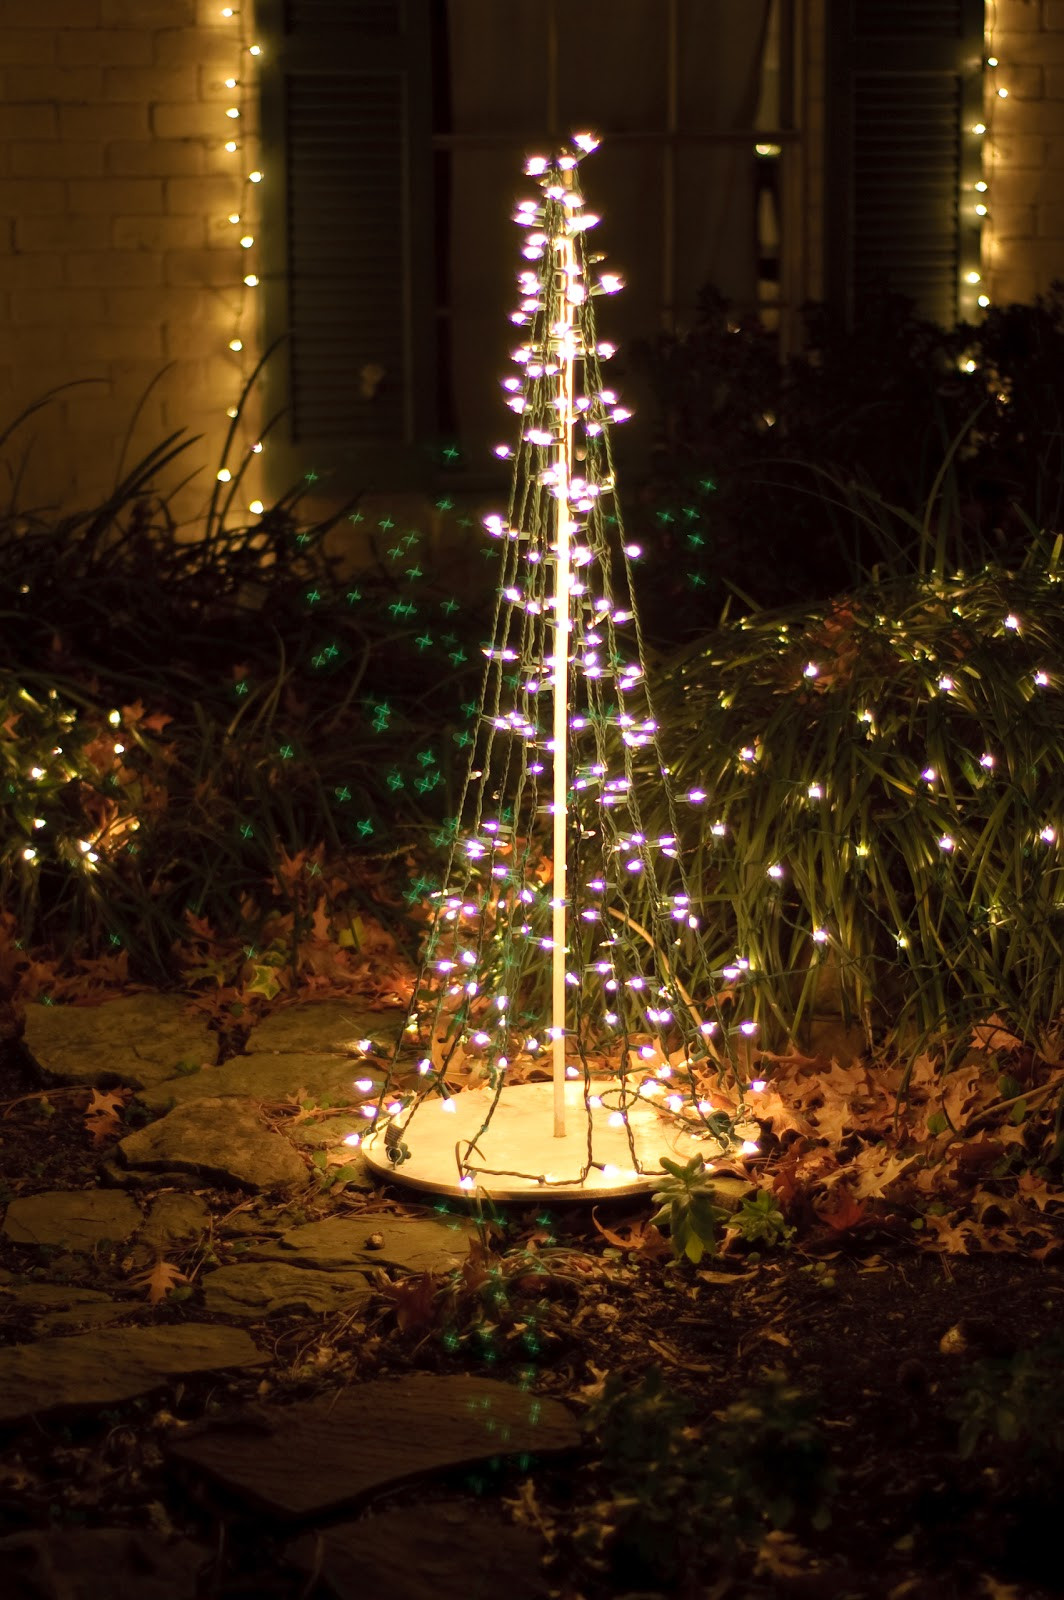 Outdoor Lighted Christmas Trees
 Lilybug Designs Outdoor Christmas Tree